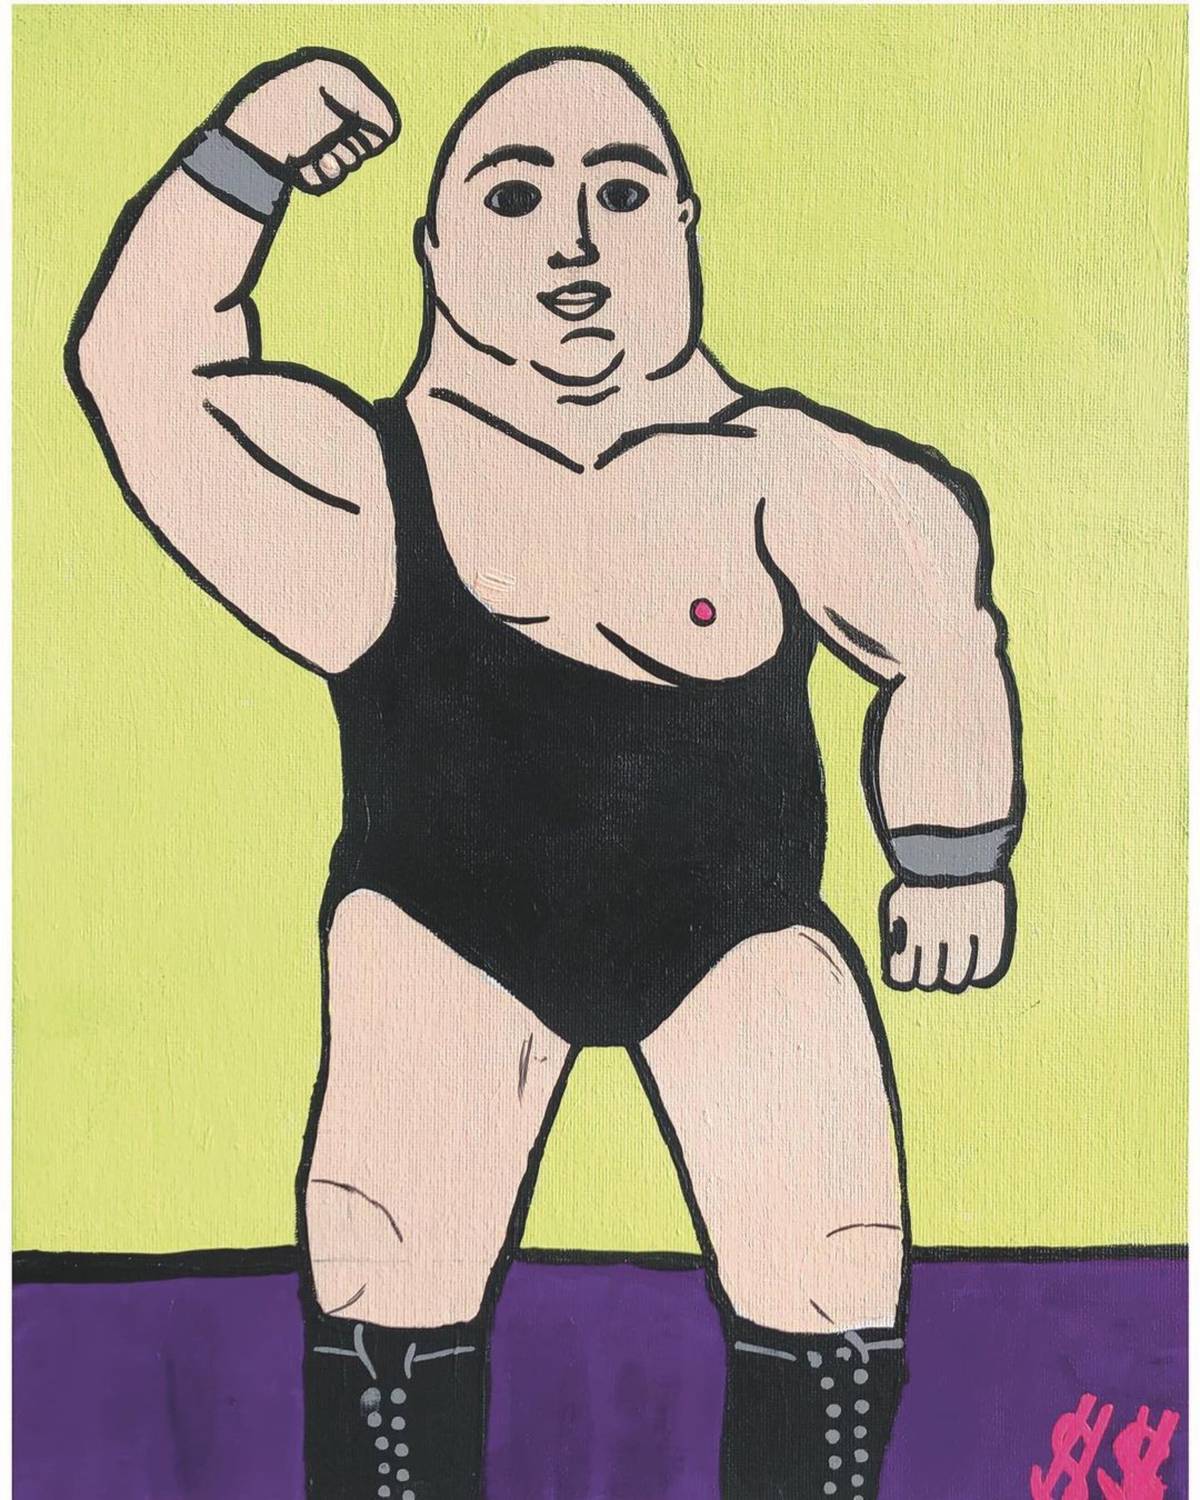 a painting of a wrestler flexing his muscles